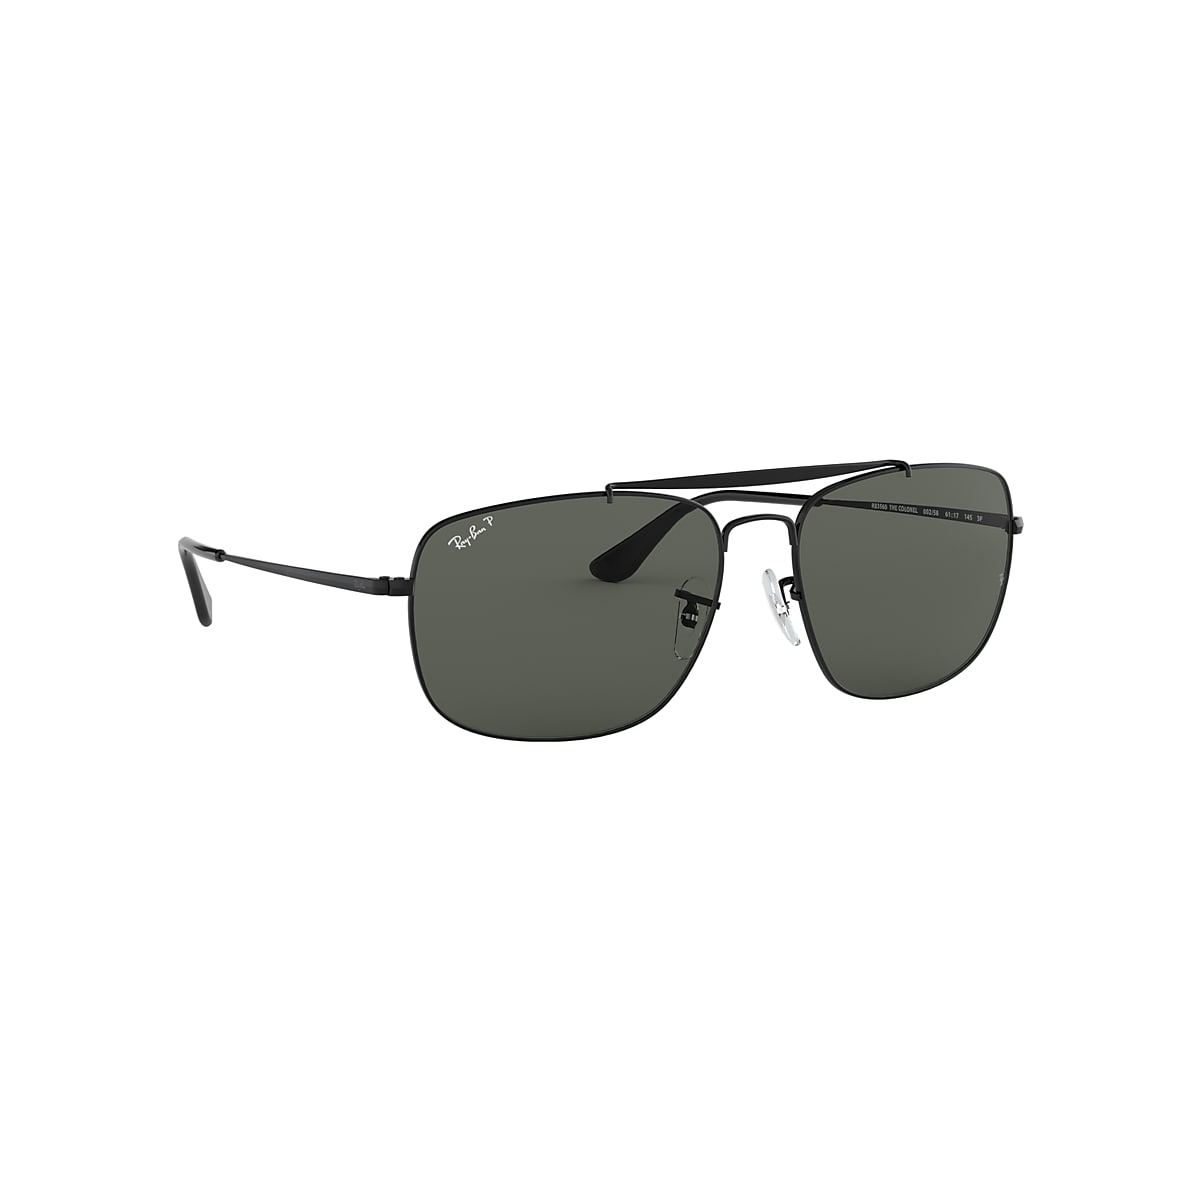 Colonel Sunglasses in Black and Green | Ray-Ban®